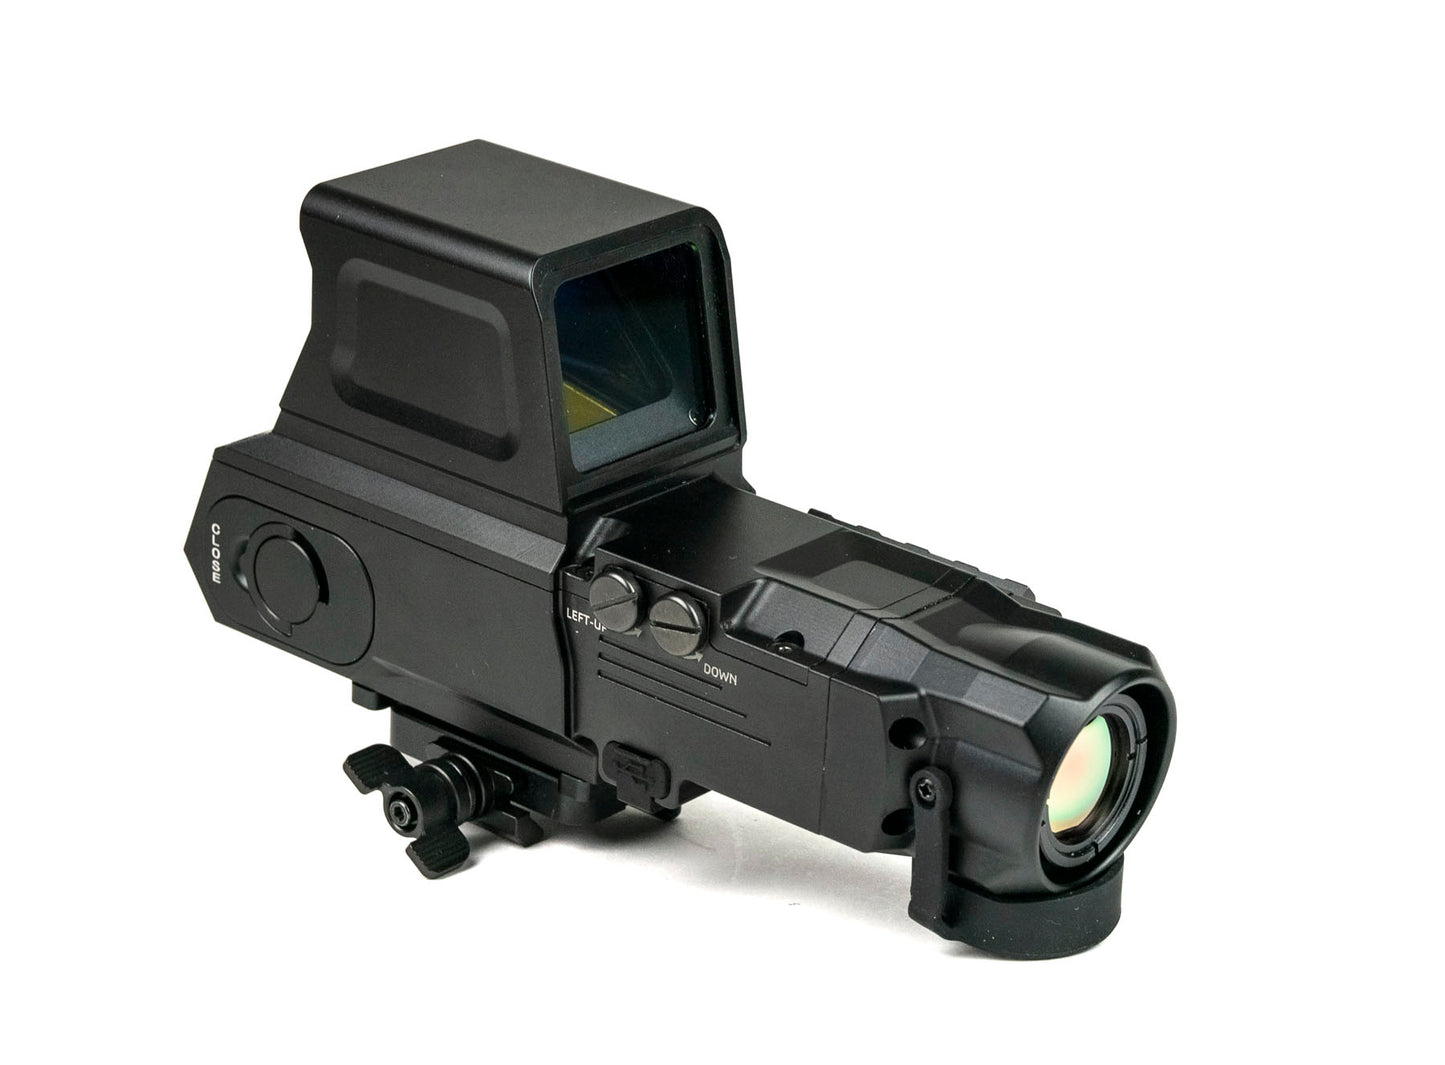 Infiray Fast FAL19 34mm Thermal Fusion Holosight